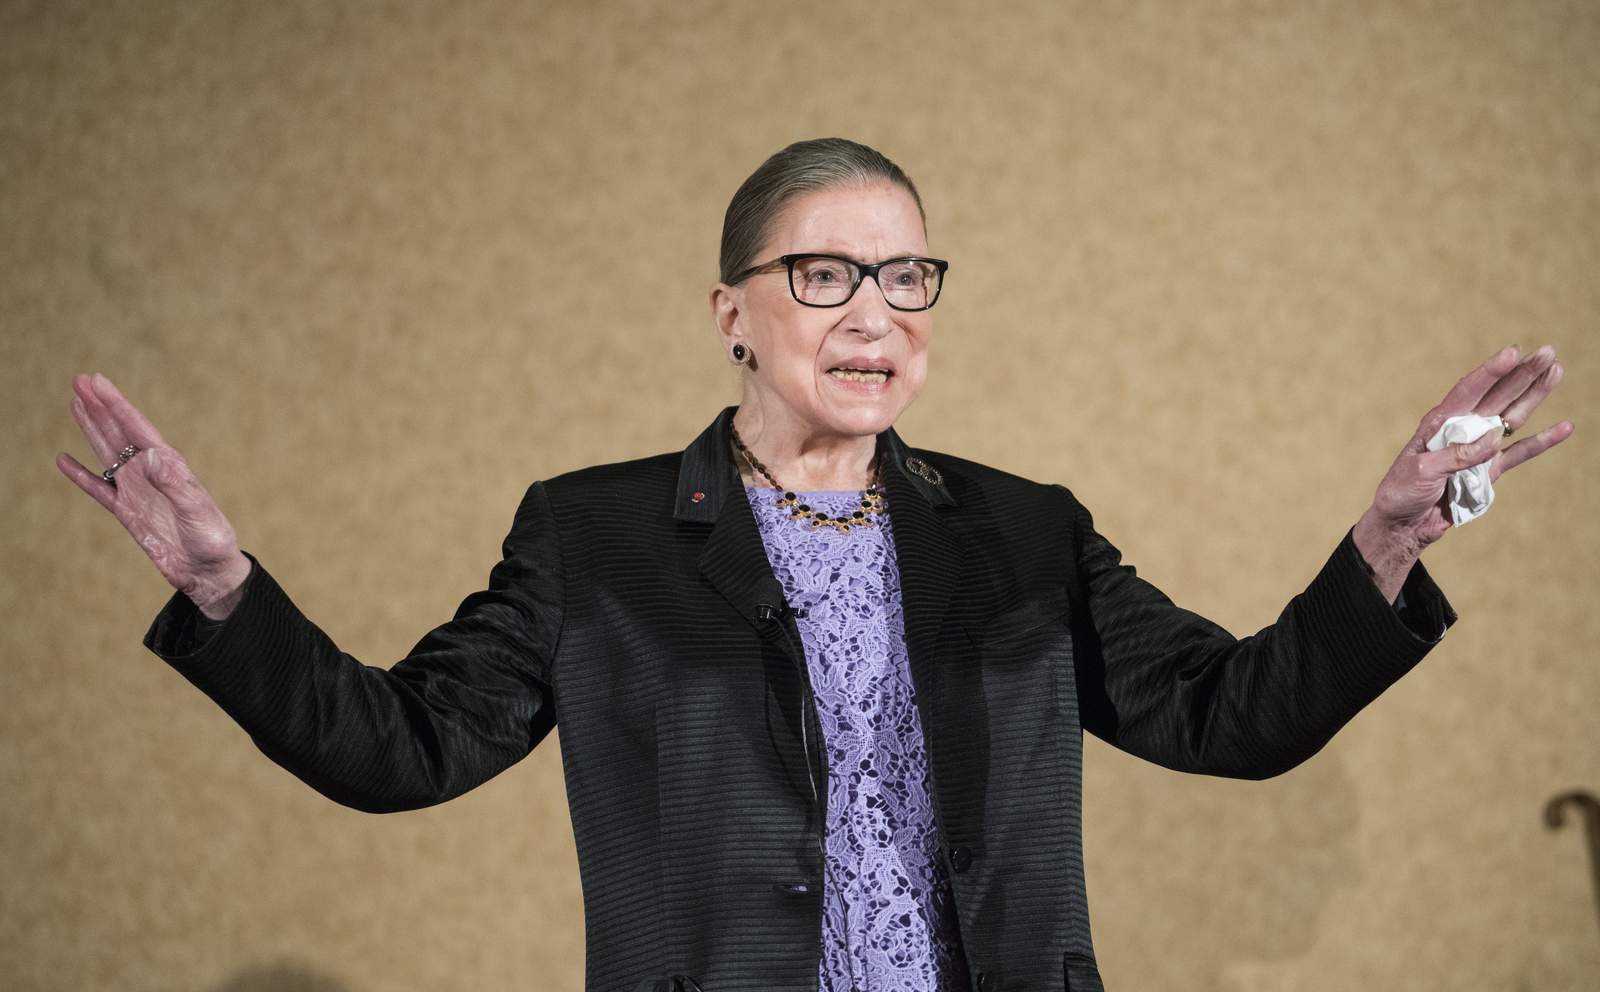 LIVE STREAM: Justice Ruth Bader Ginsburg lies in state at US Capitol